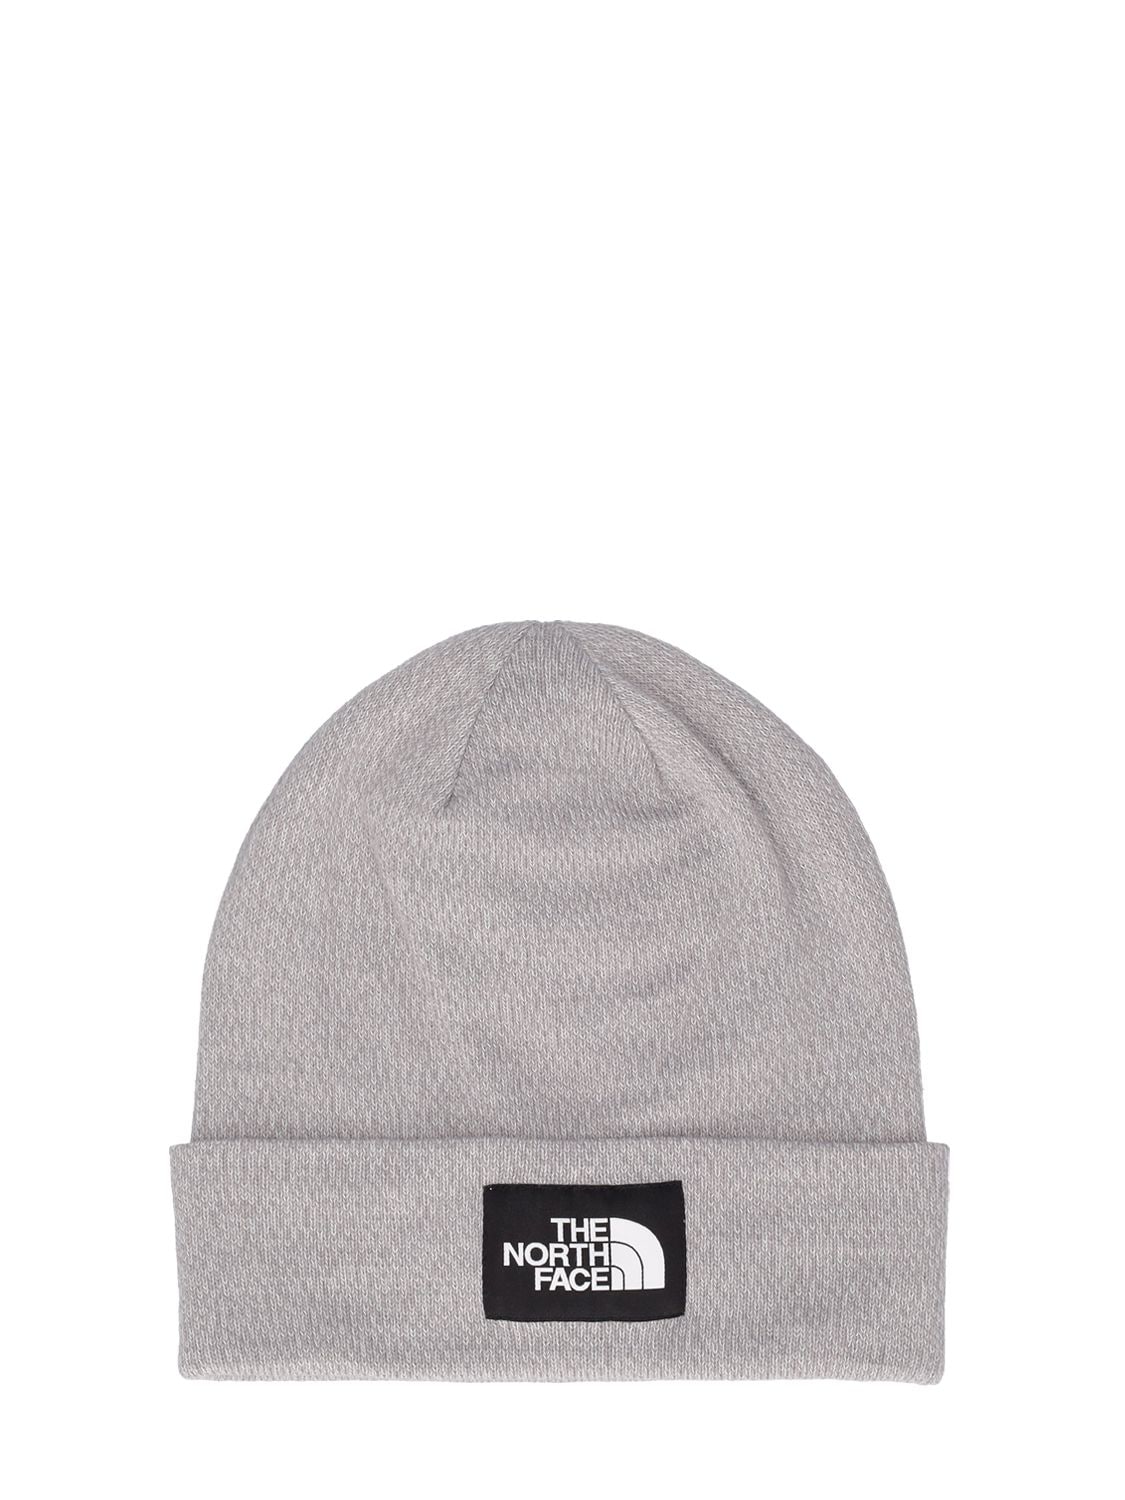 The North Face Dock Worker Beanie In Grey